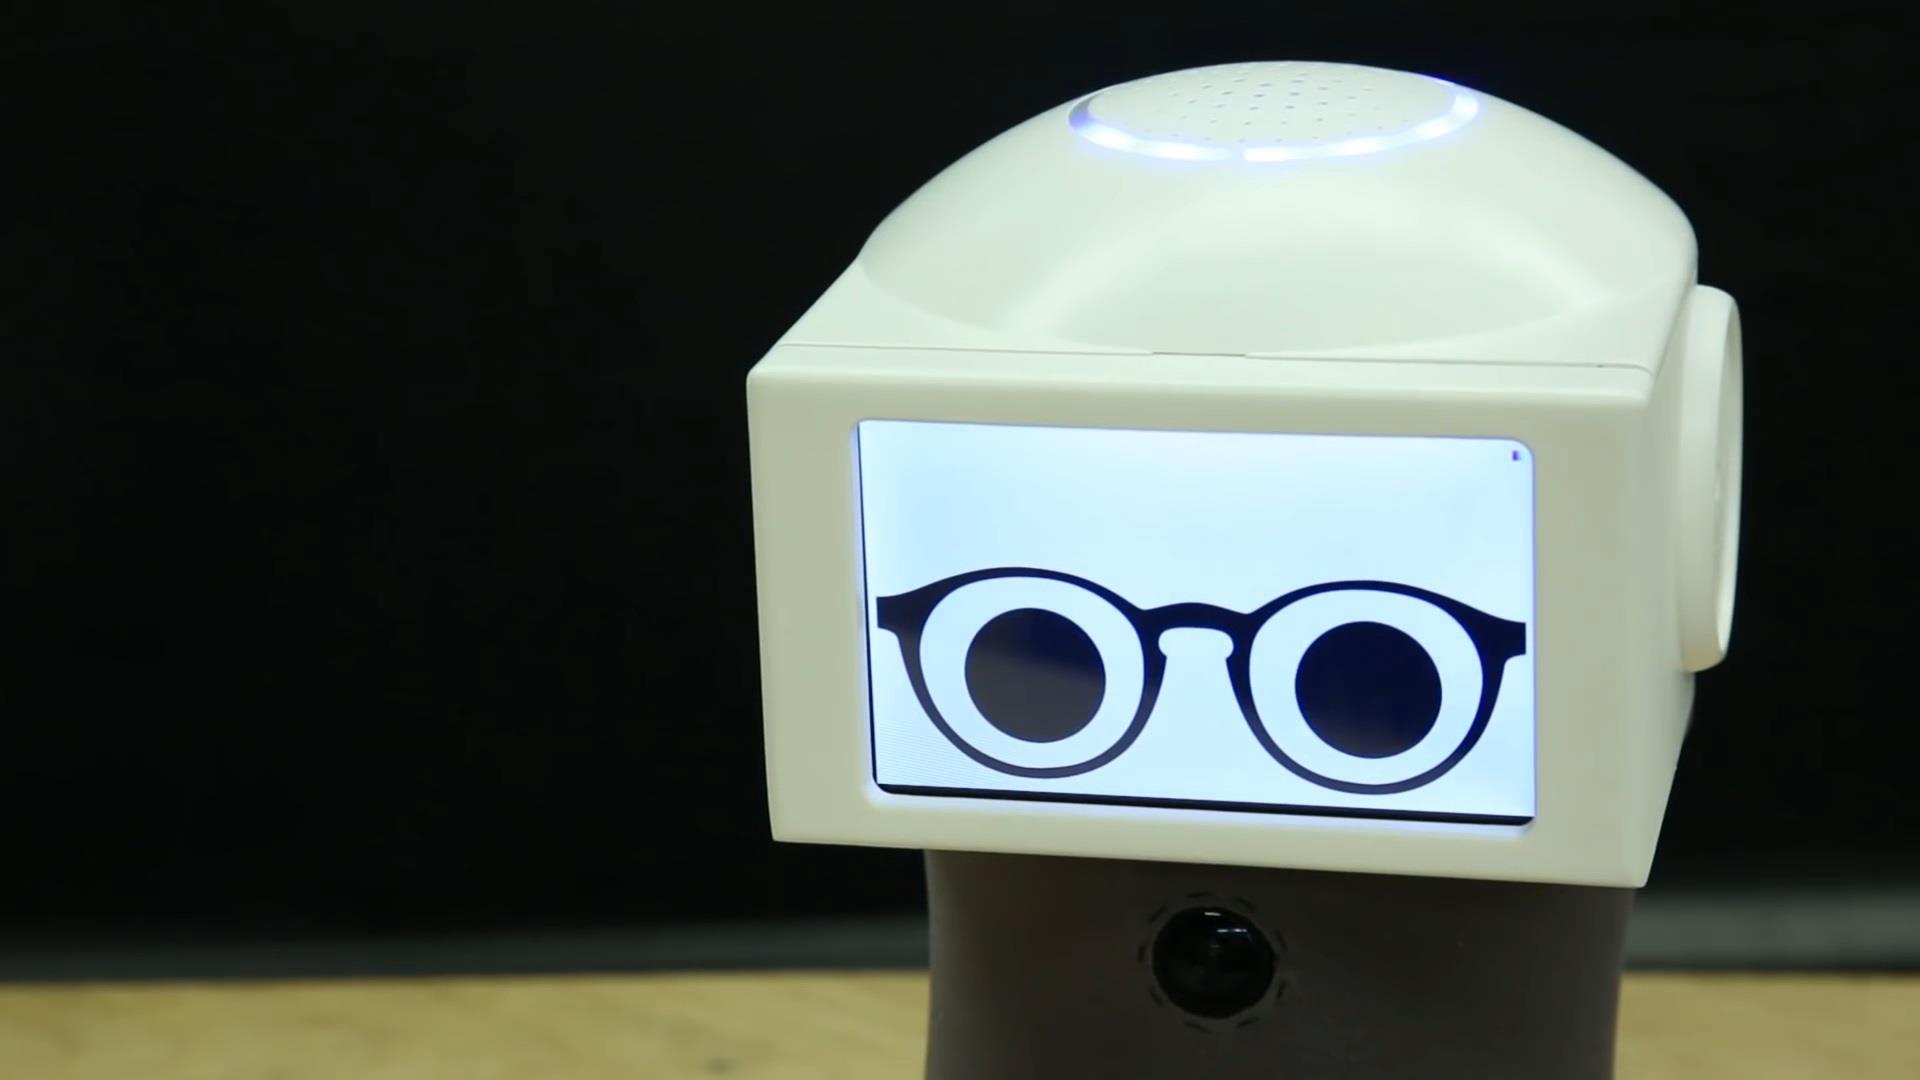 Meet the Adorable, Sassy Robot That Speaks in GIFs